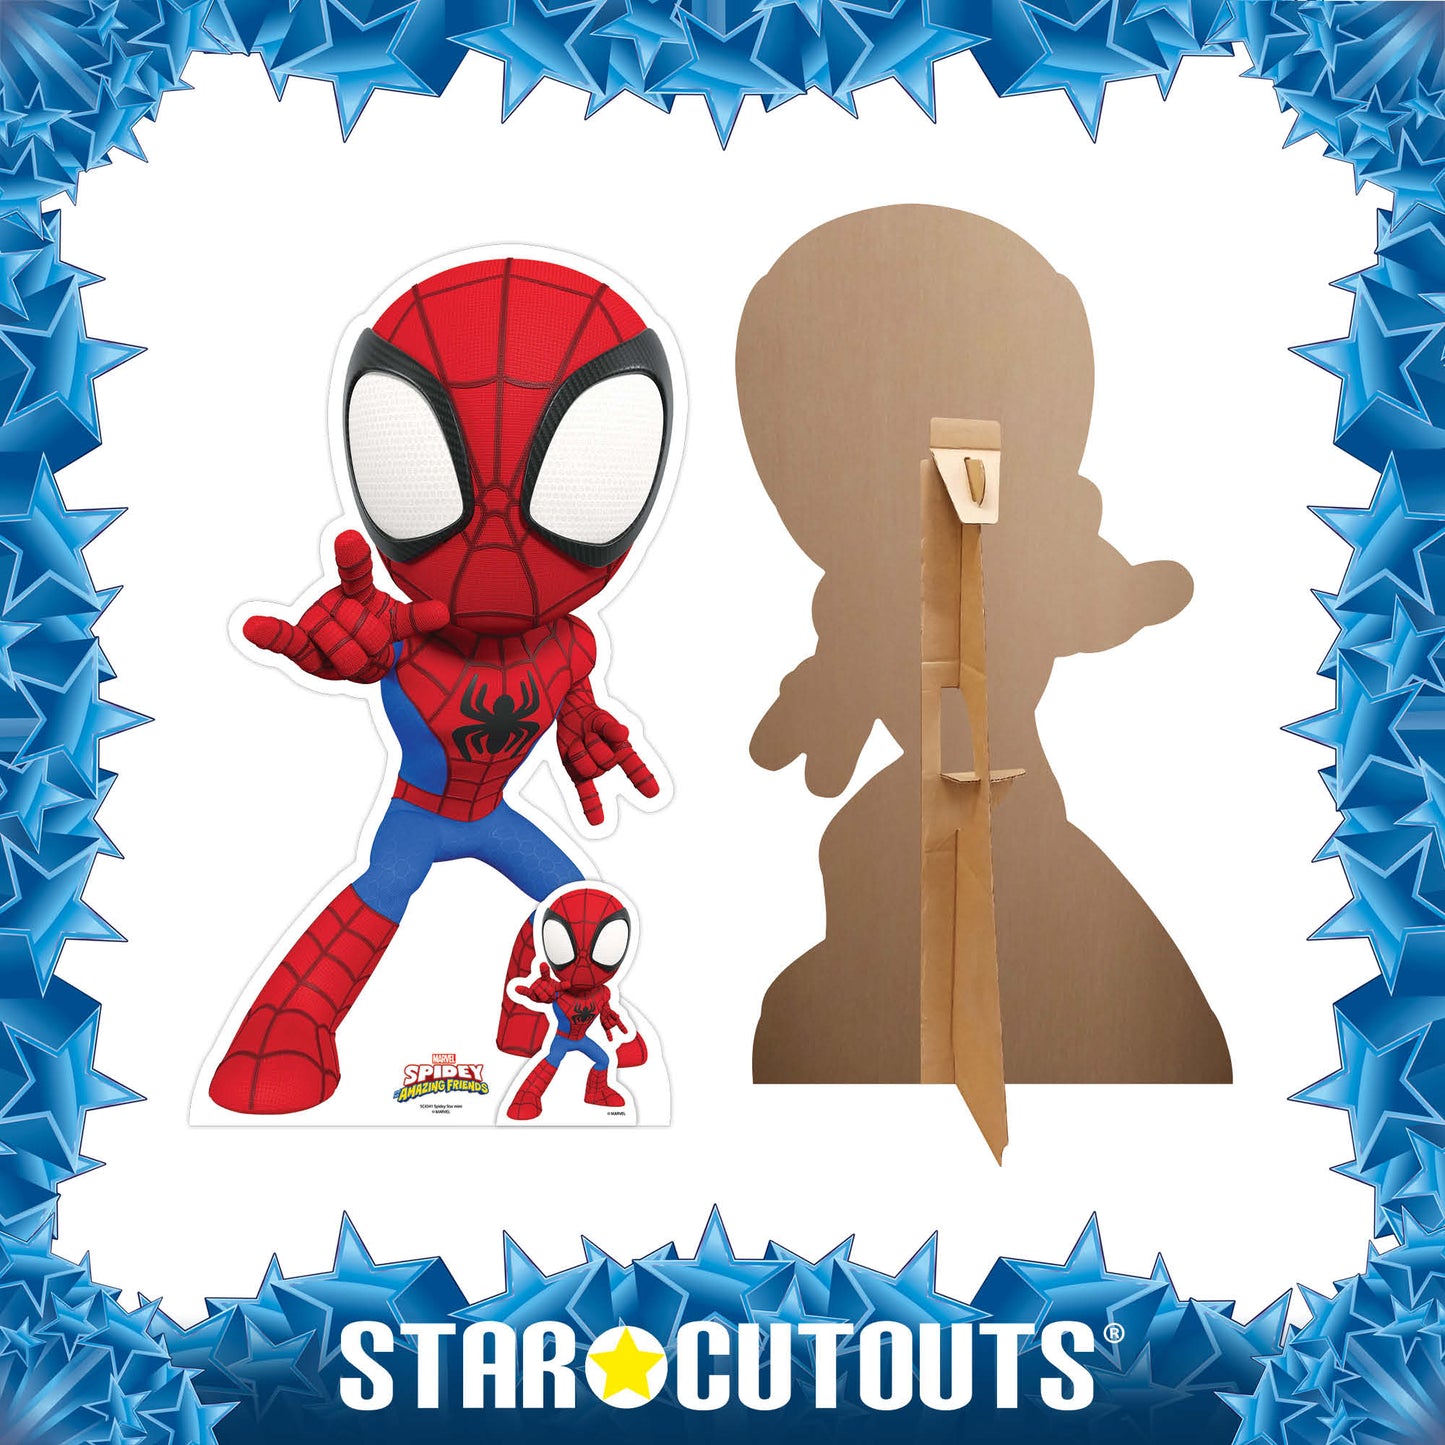 SC4342 Spin Spidey and His Amazing Friends Cardboard Cutout Height